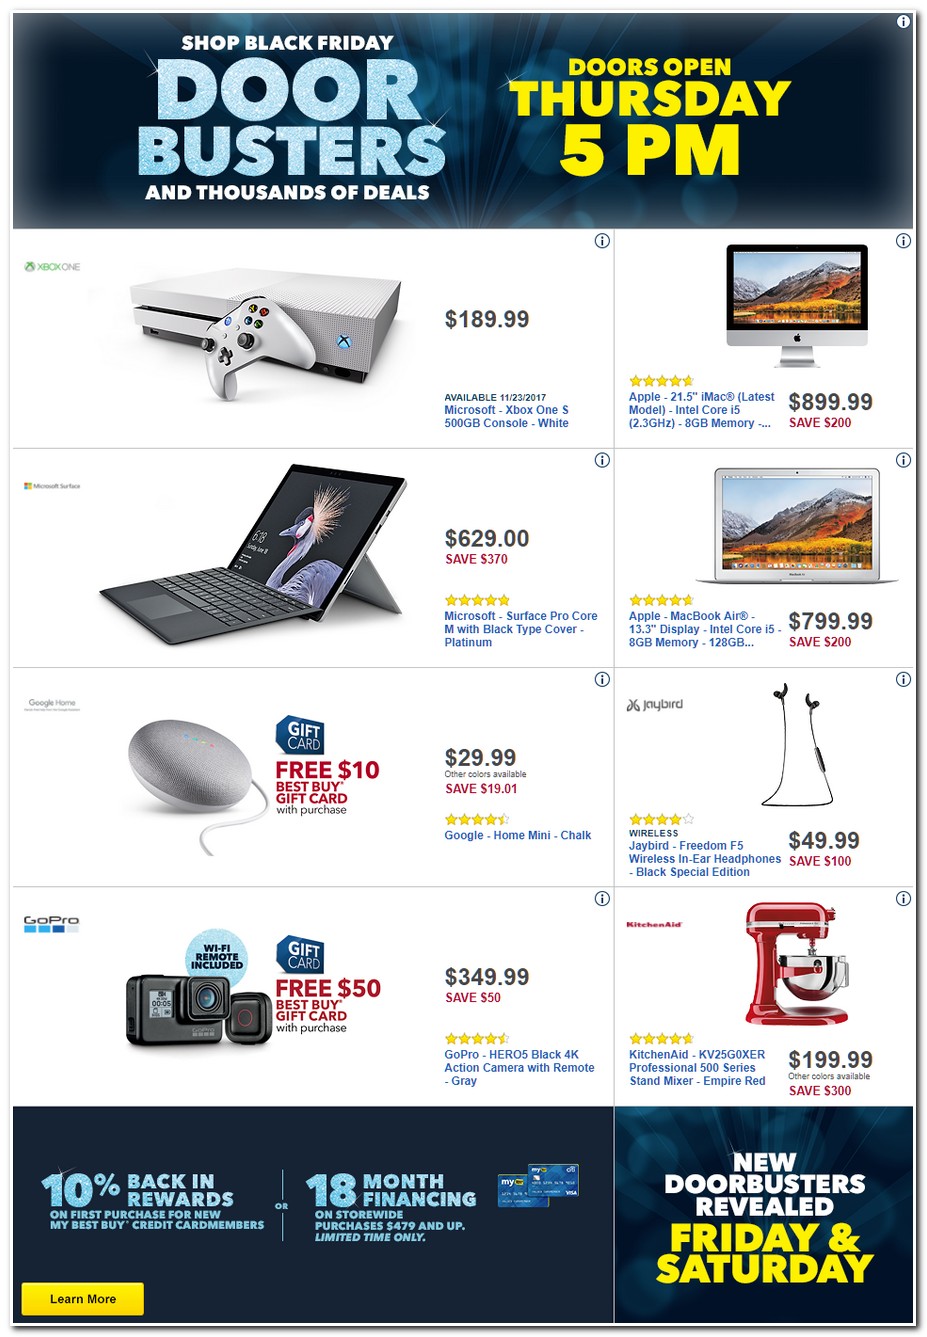 Best Buy Black Friday Ads, Sales, and Deals 2017, Promo Codes, Deals 2018 - CouponShy